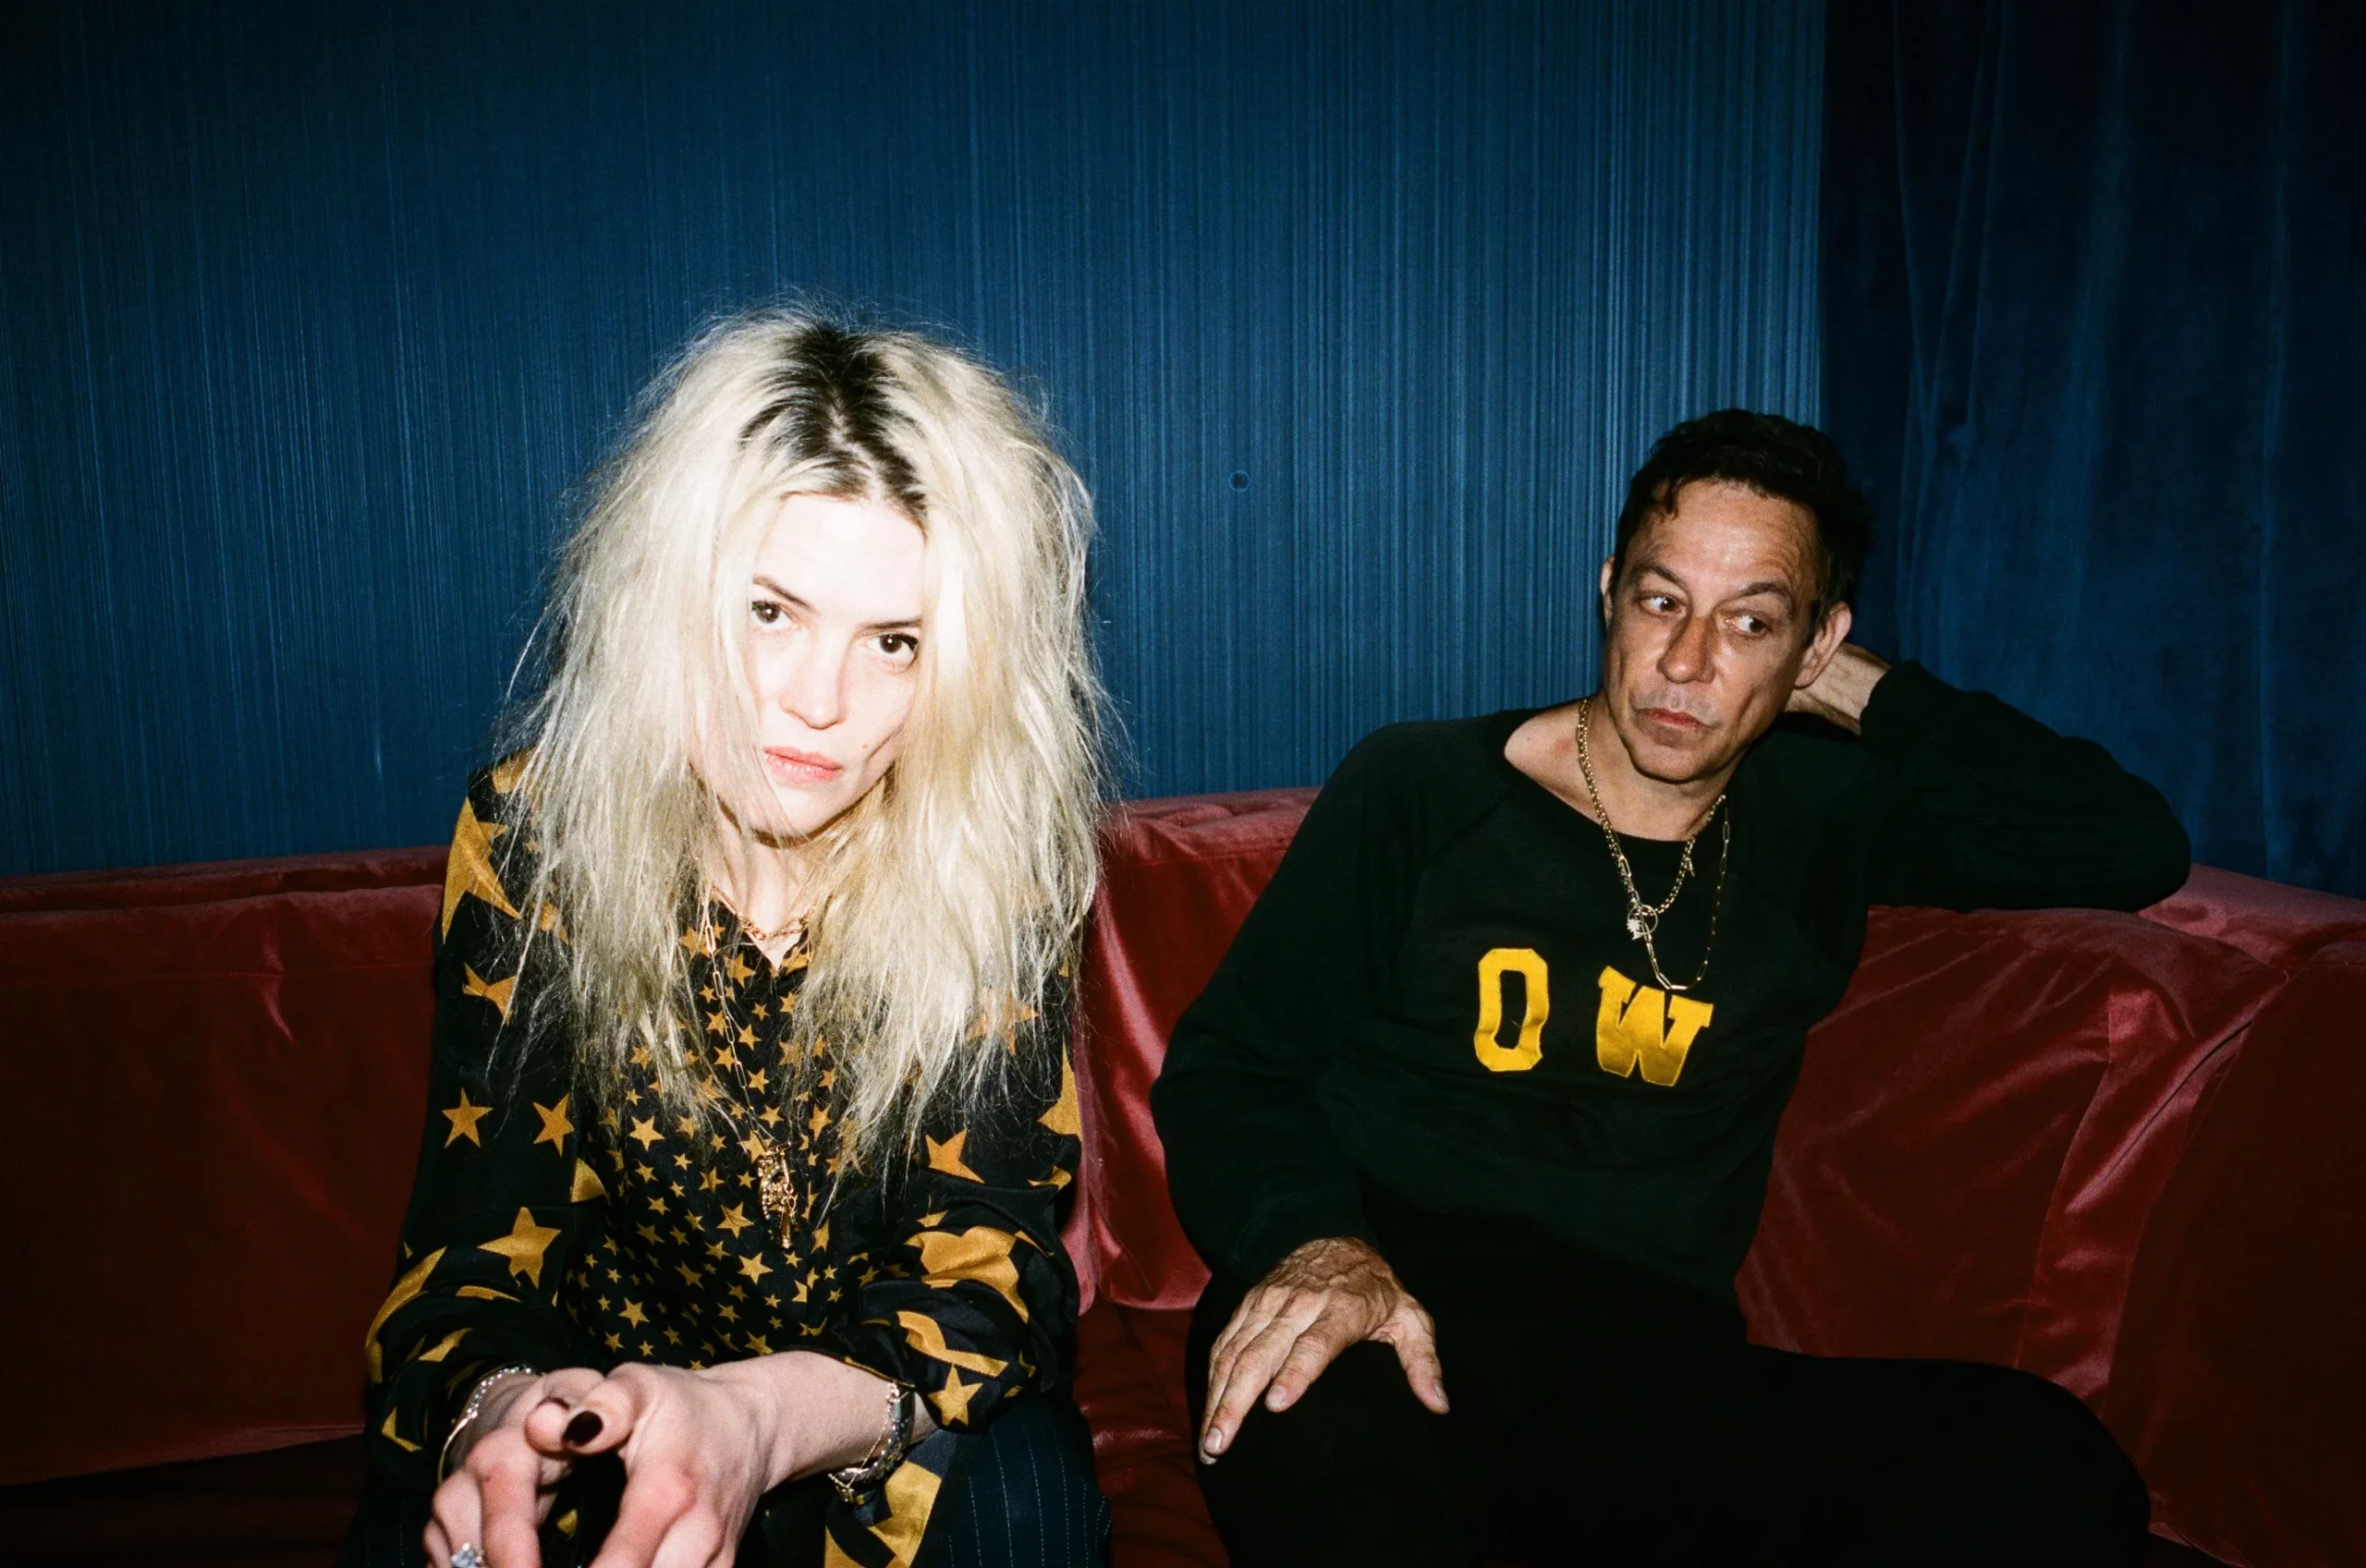 Alison Mosshart and Jamie Hince sit on a red velvet couch with a blue curtain behind them.